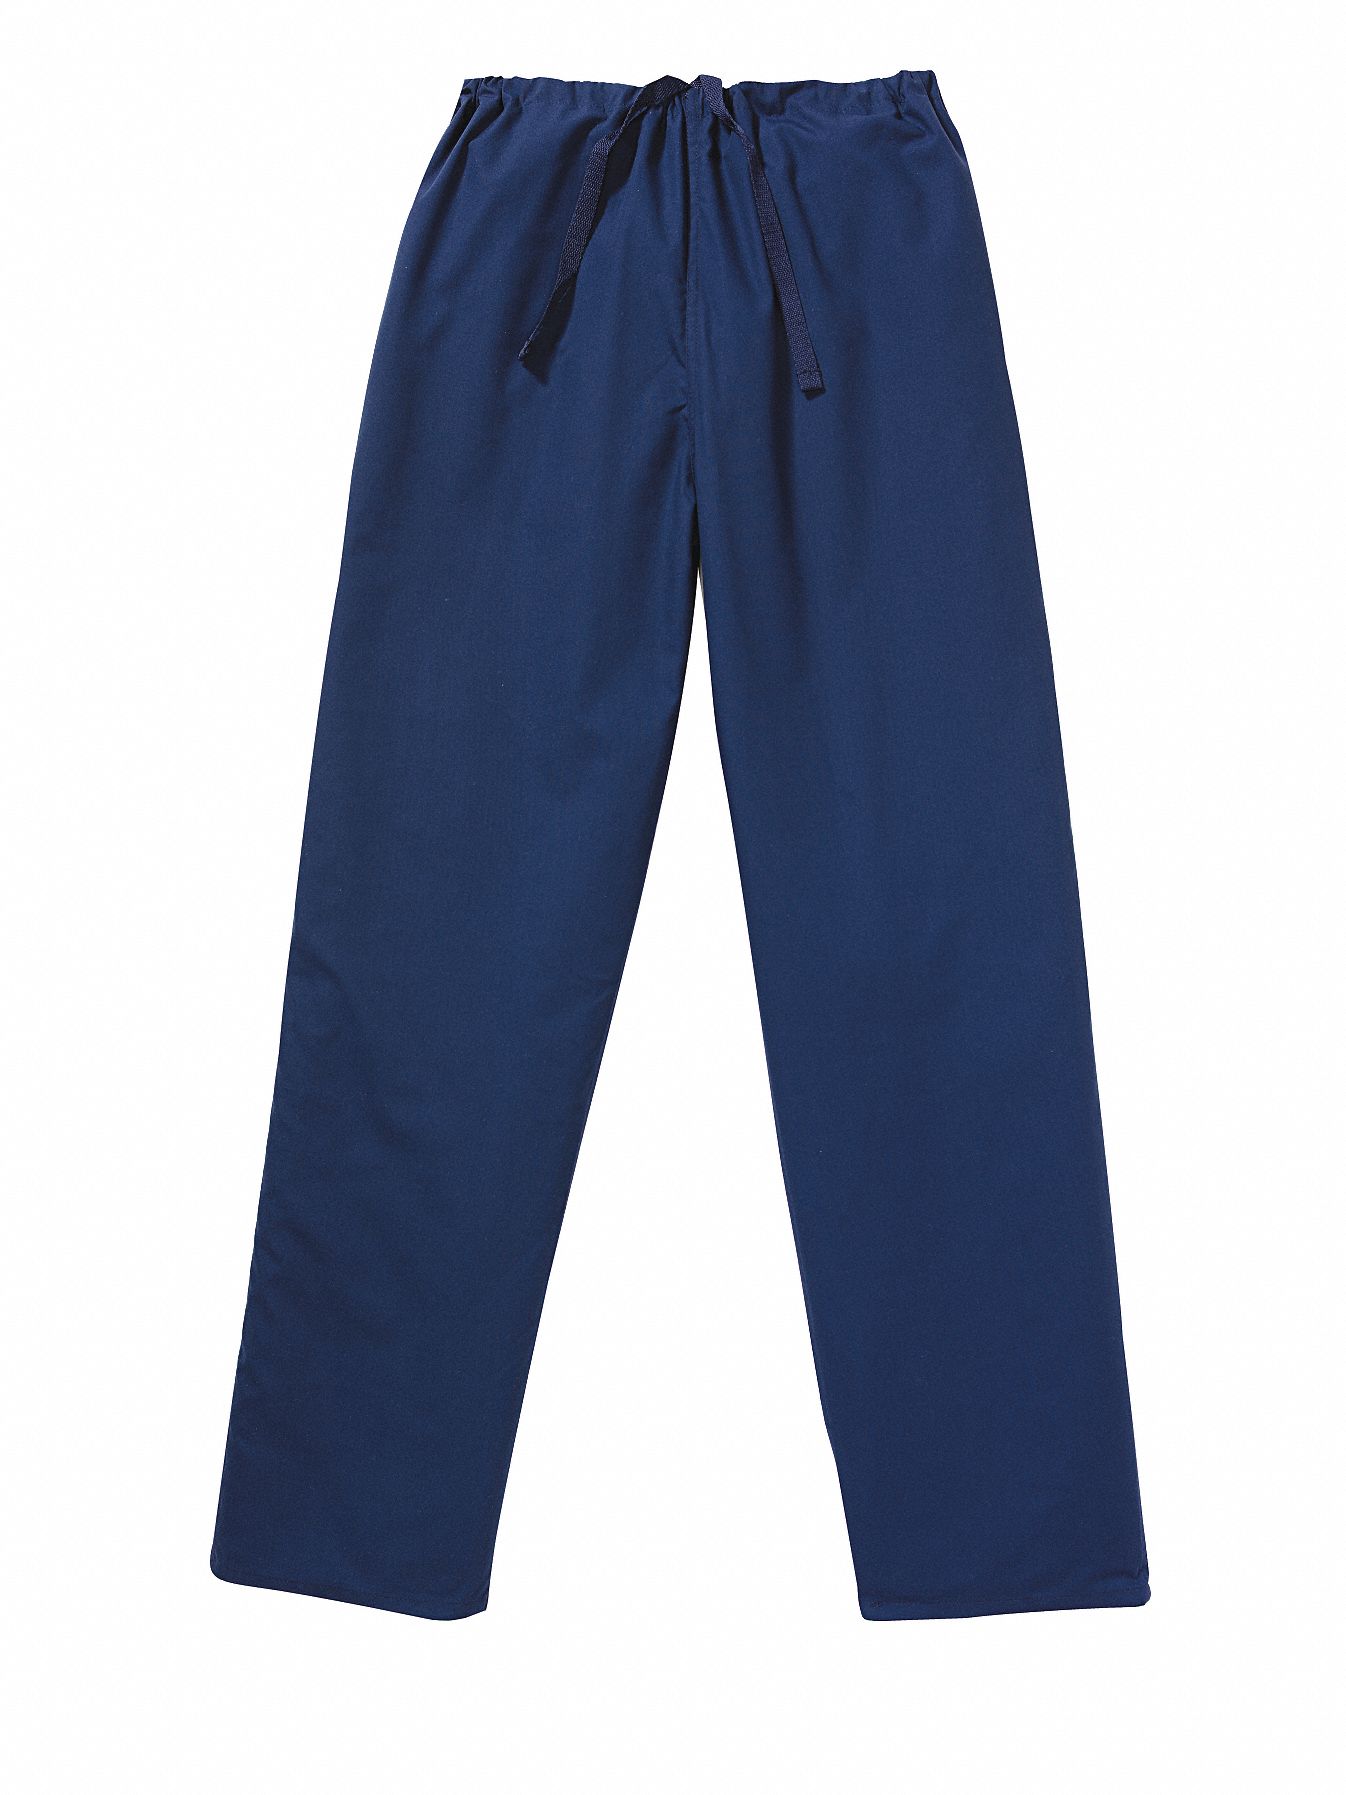 Scrub Pants: Navy, Unisex, 34 in x 31 in, M, Cotton/Polyester, Pants, 1 Pockets, Drawstring